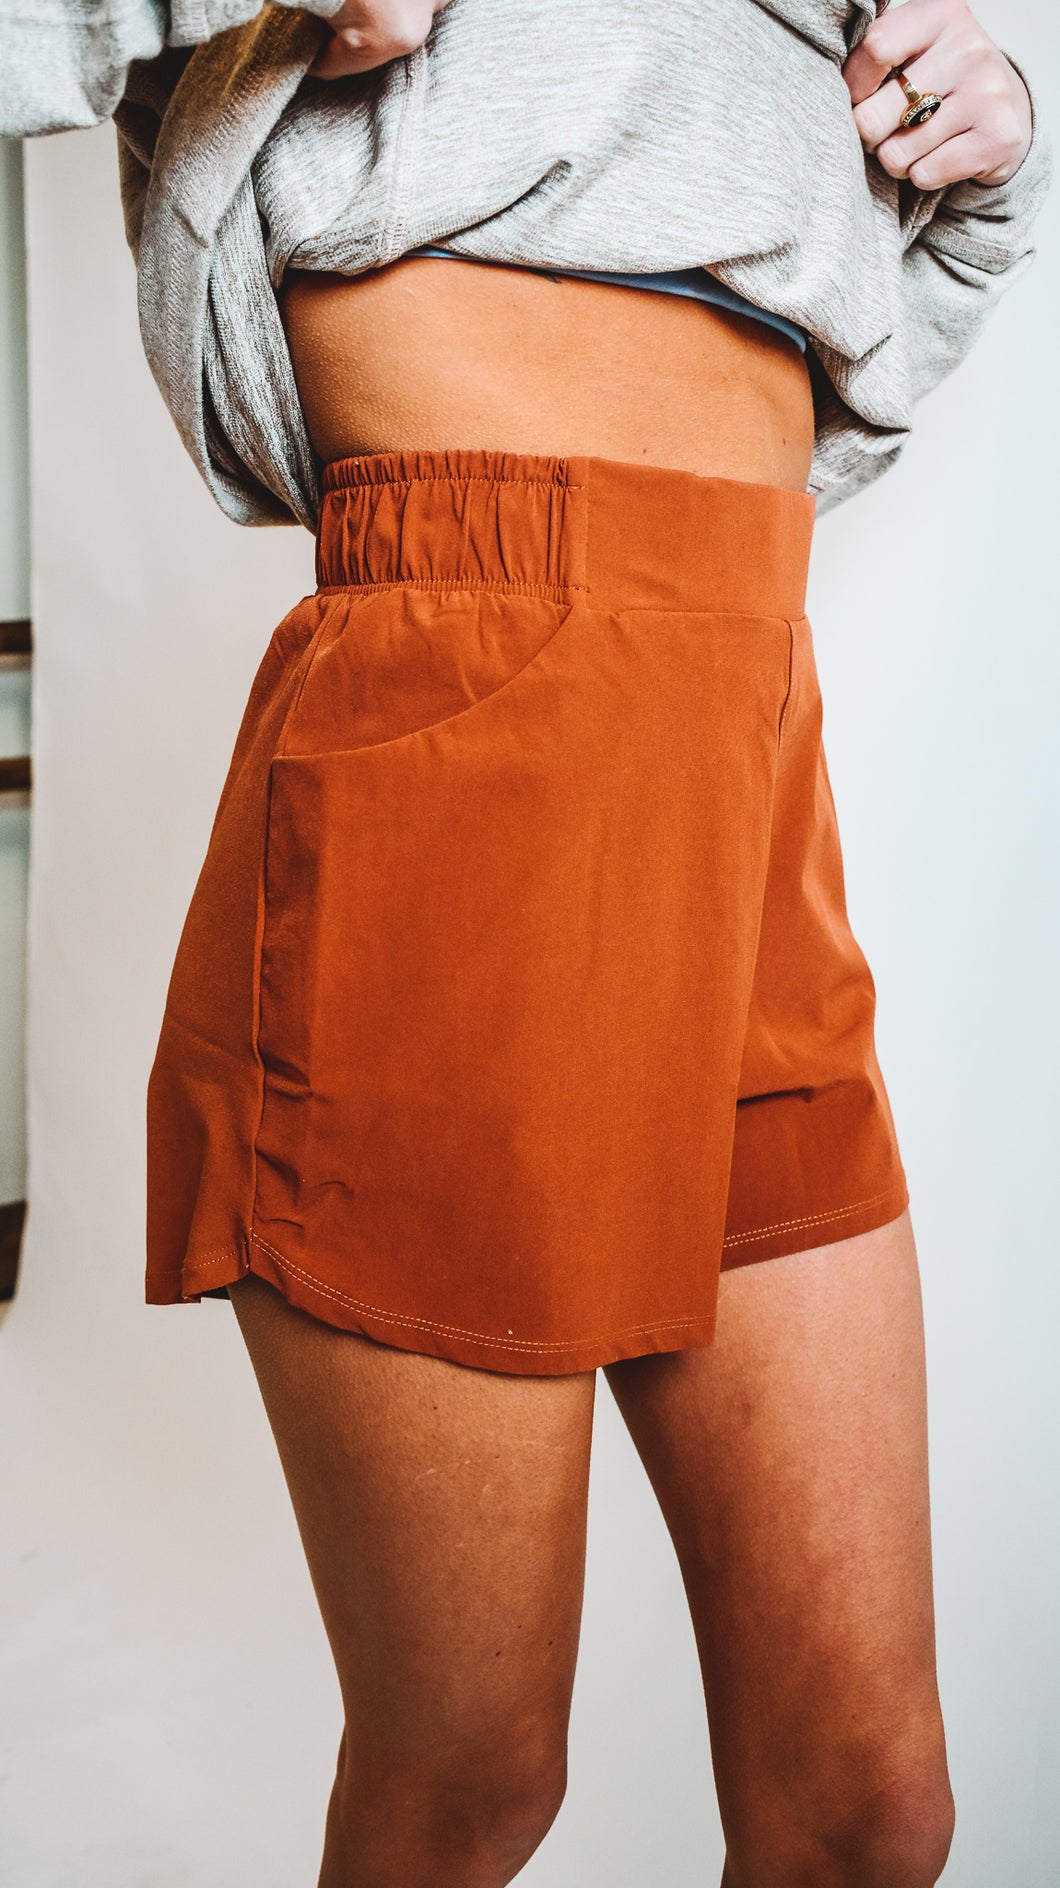 Athleisure Shorts with Curved Hemline